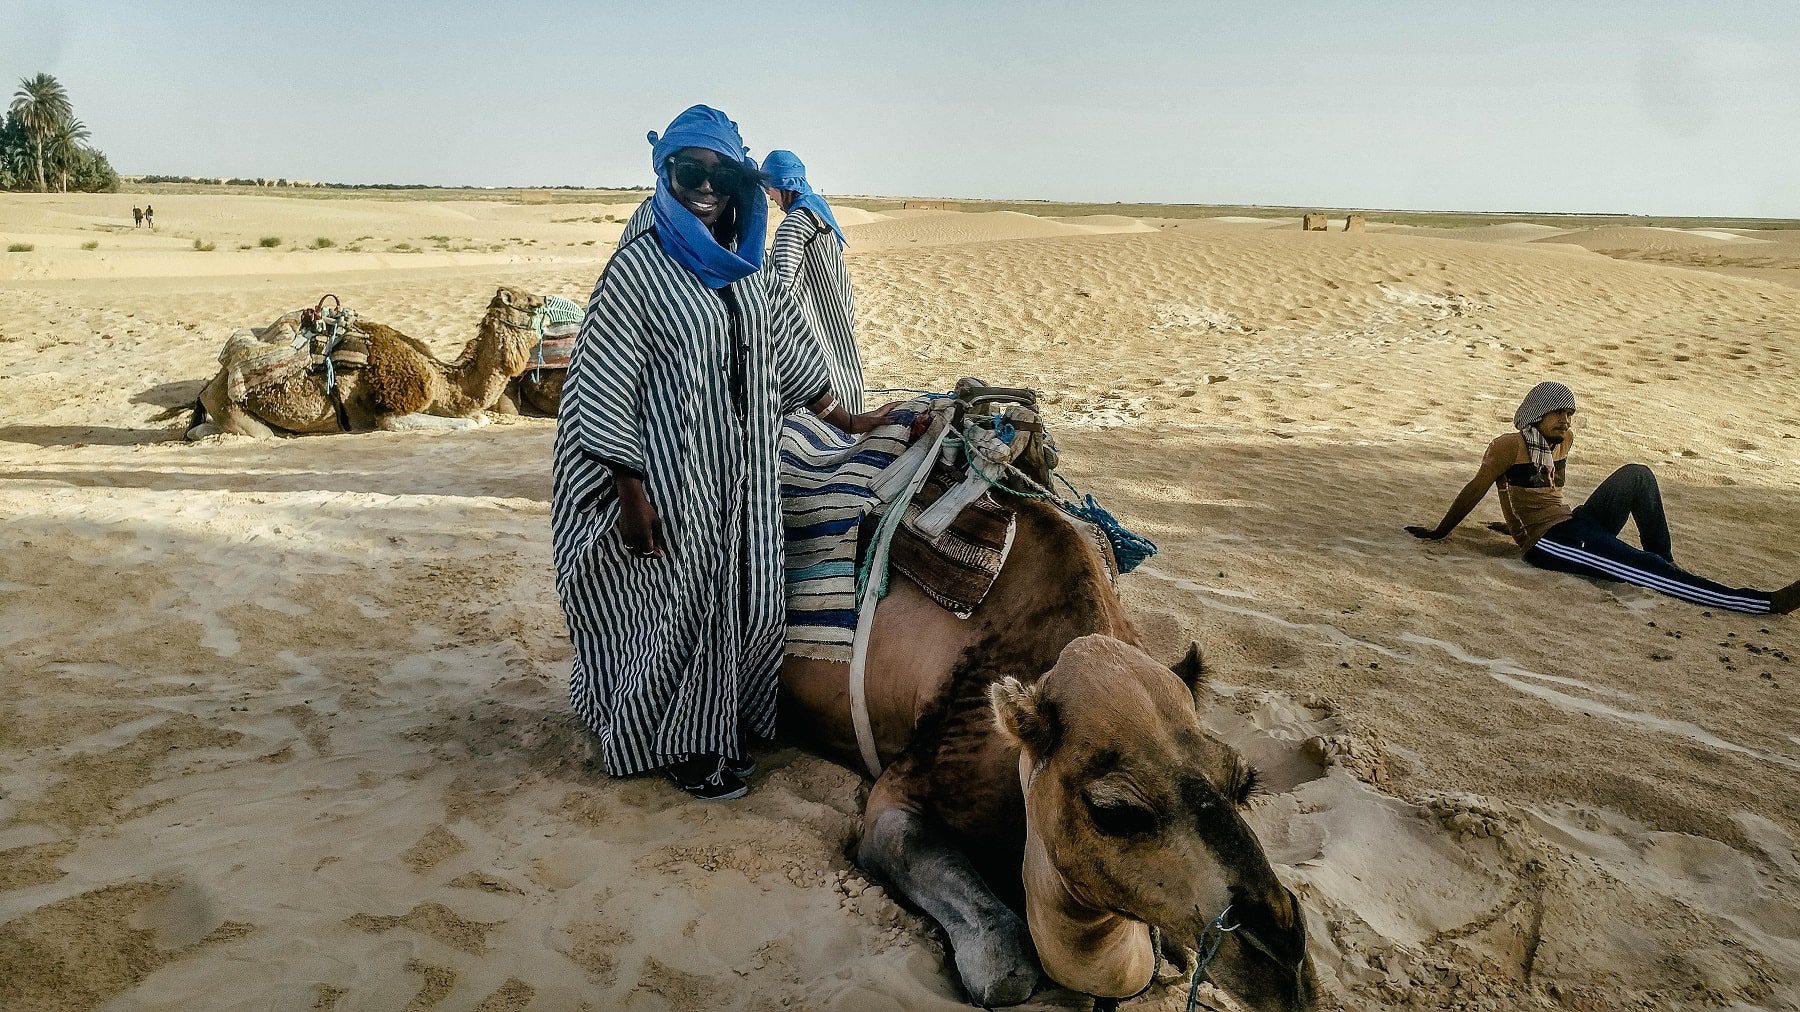 Wearing traditional garb to ride my camel buddy through the desert